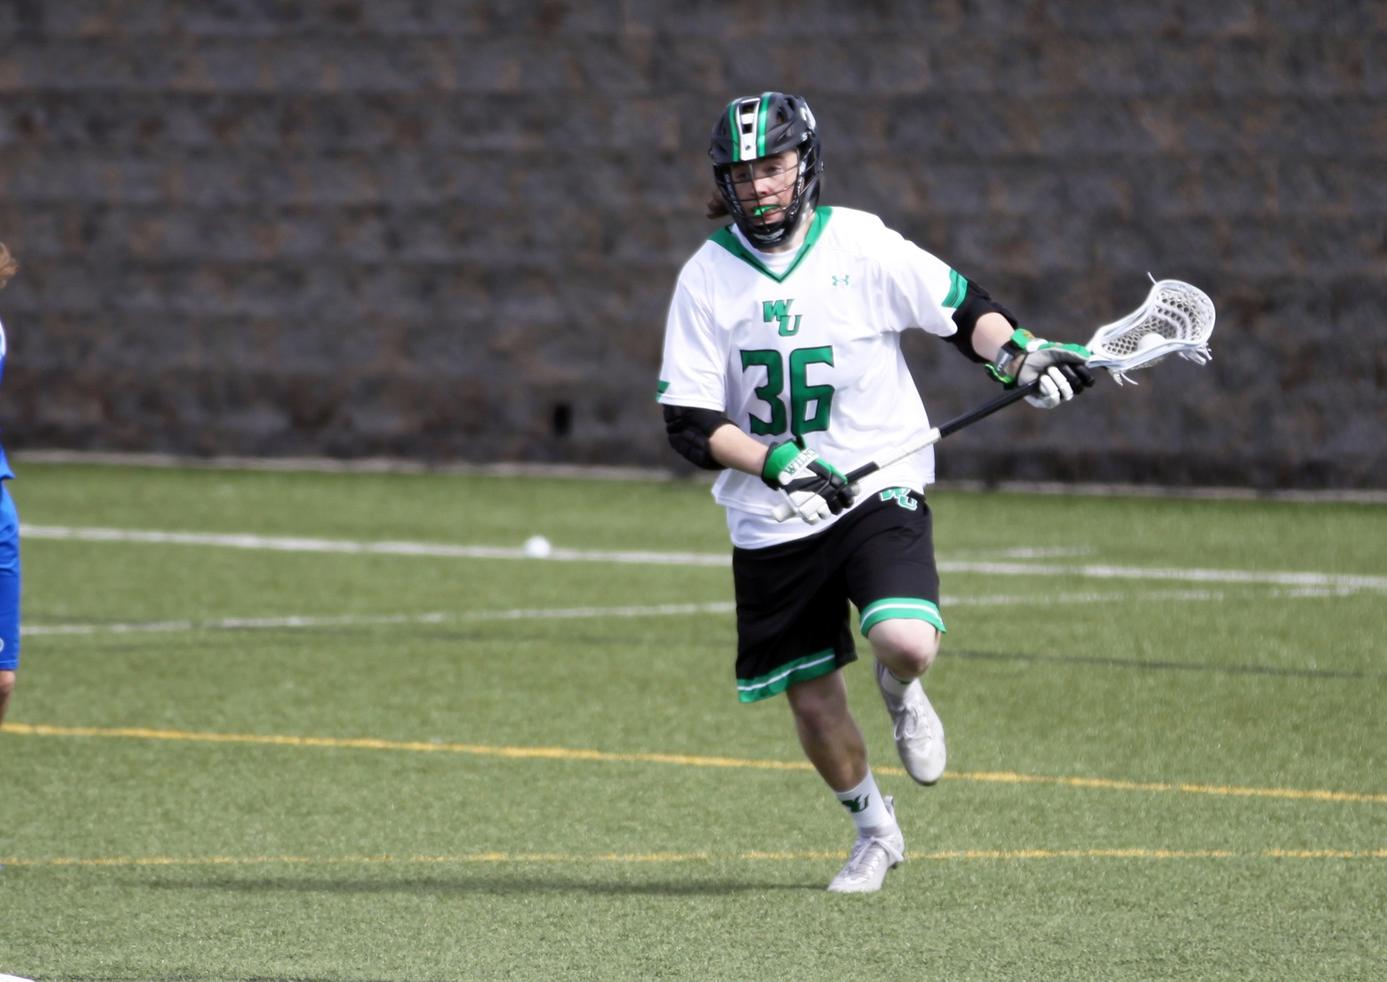 Copyright 2019; Wilmington University. All rights reserved. File Photo of Ralph Ruggiero who led the Wildcats with three goals and two assists at Walsh. Photo by Katlynne Tubo. March 13, 2019 vs. Chowan.